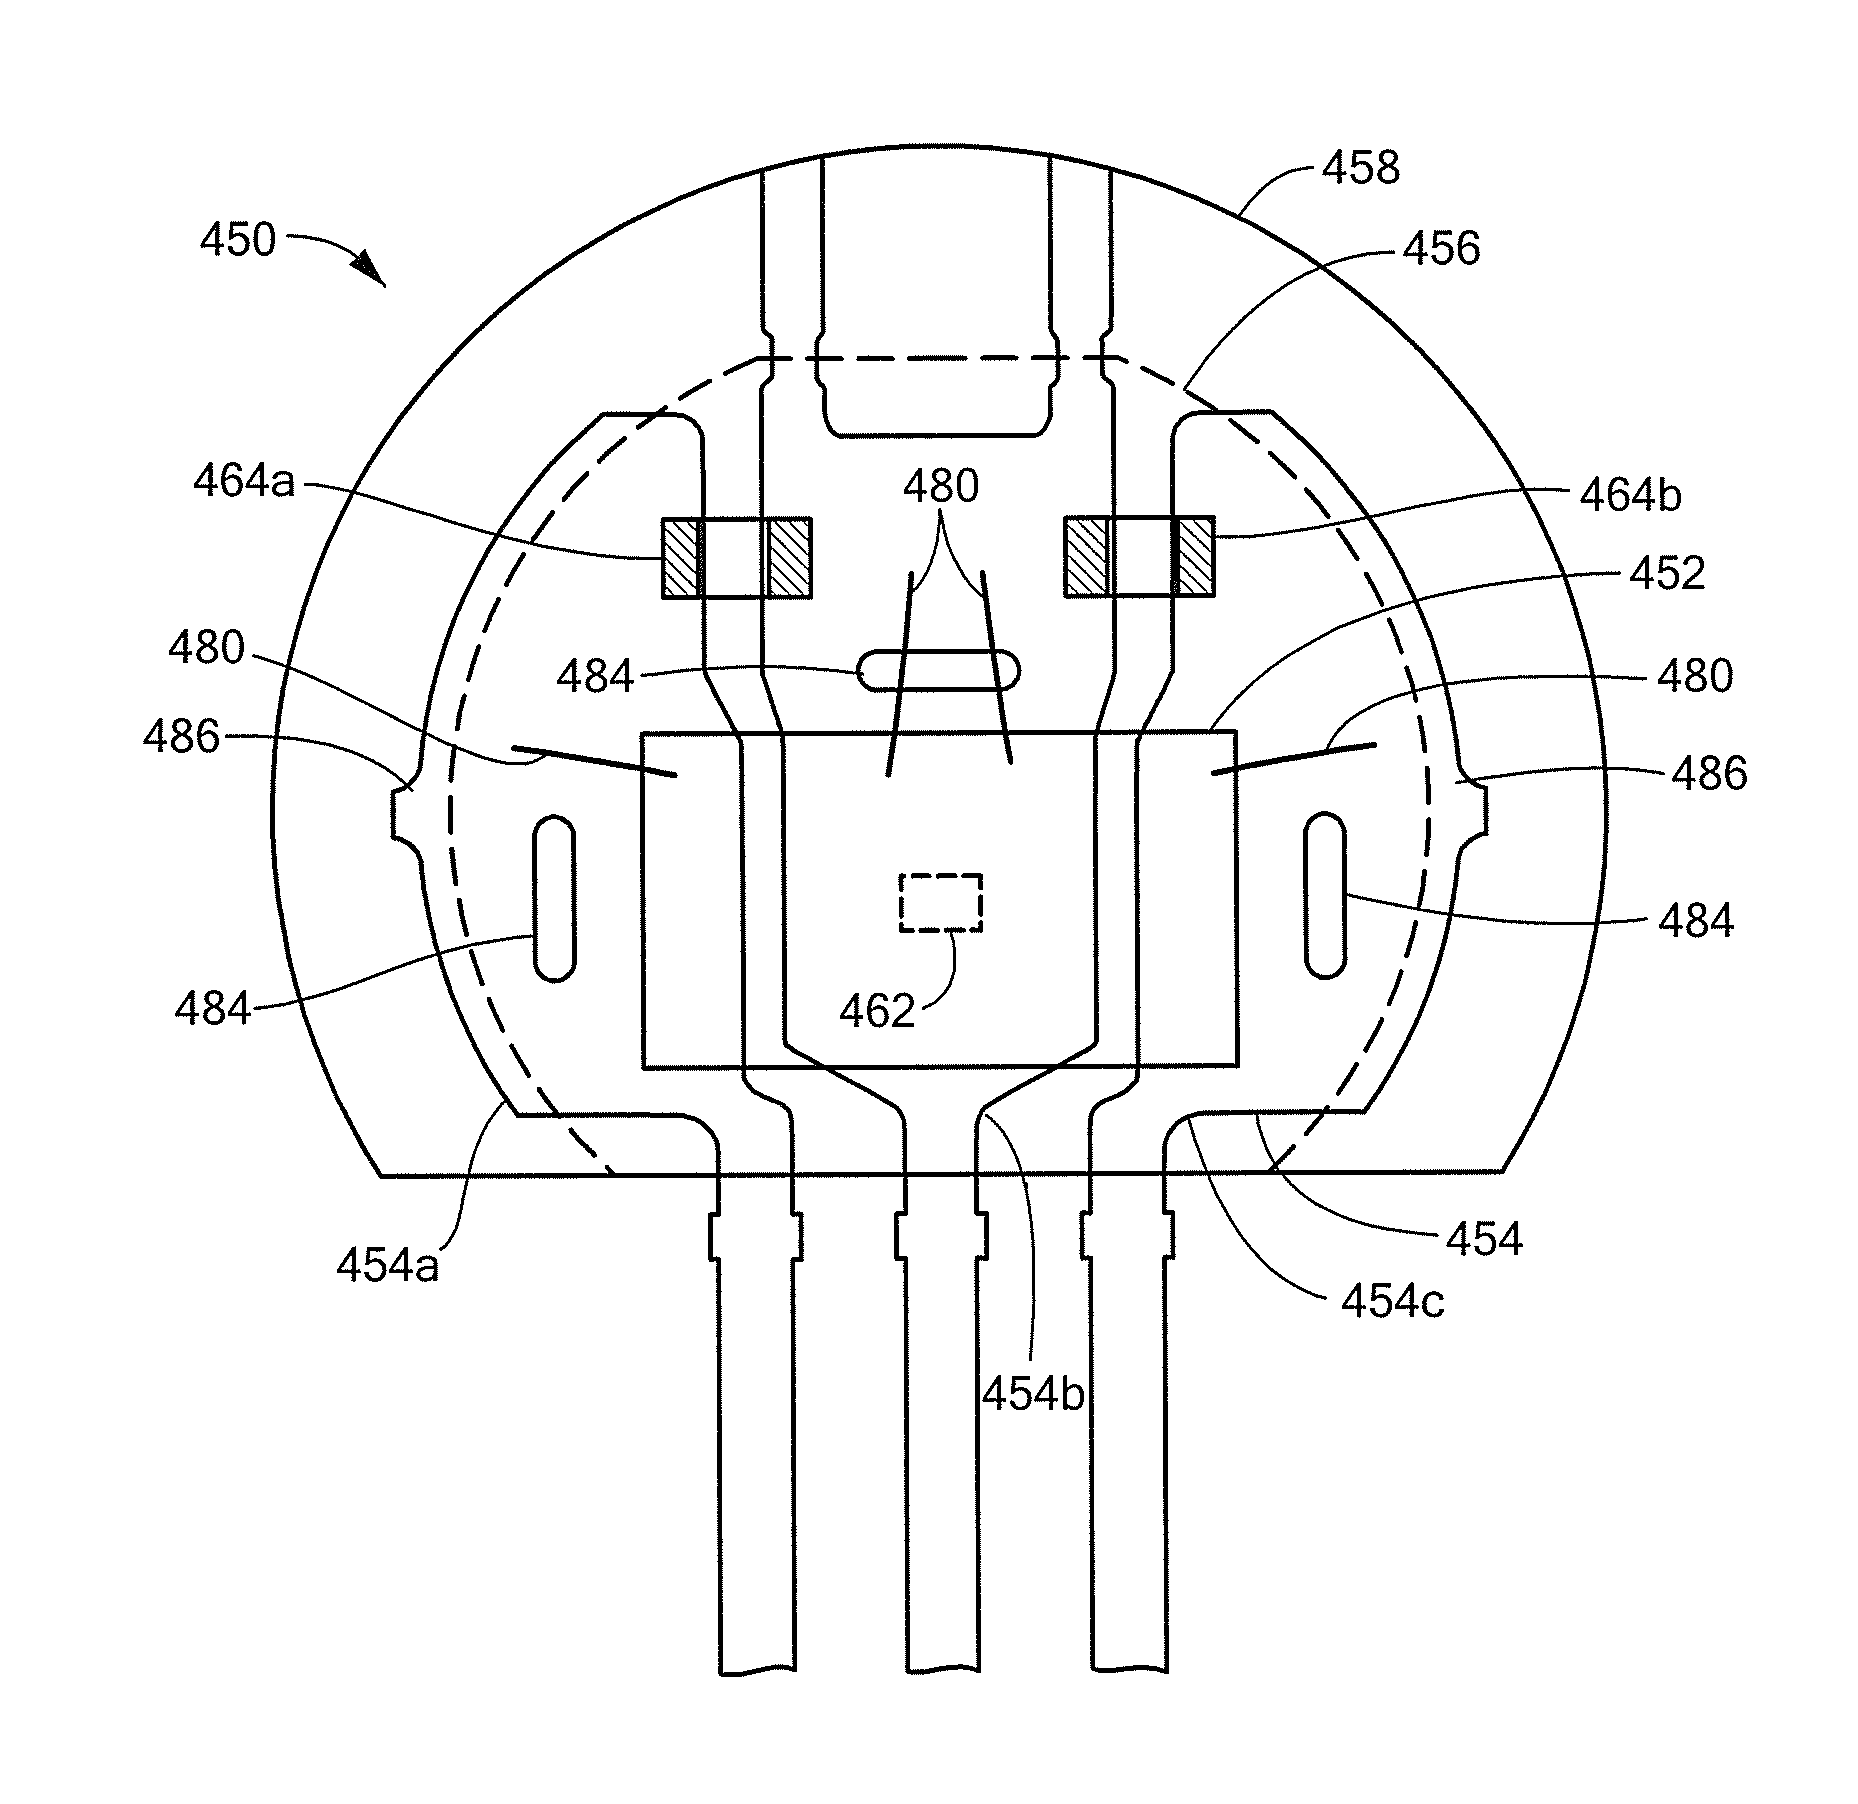 Magnetic Field Sensor Integrated Circuit with Integral Ferromagnetic Material